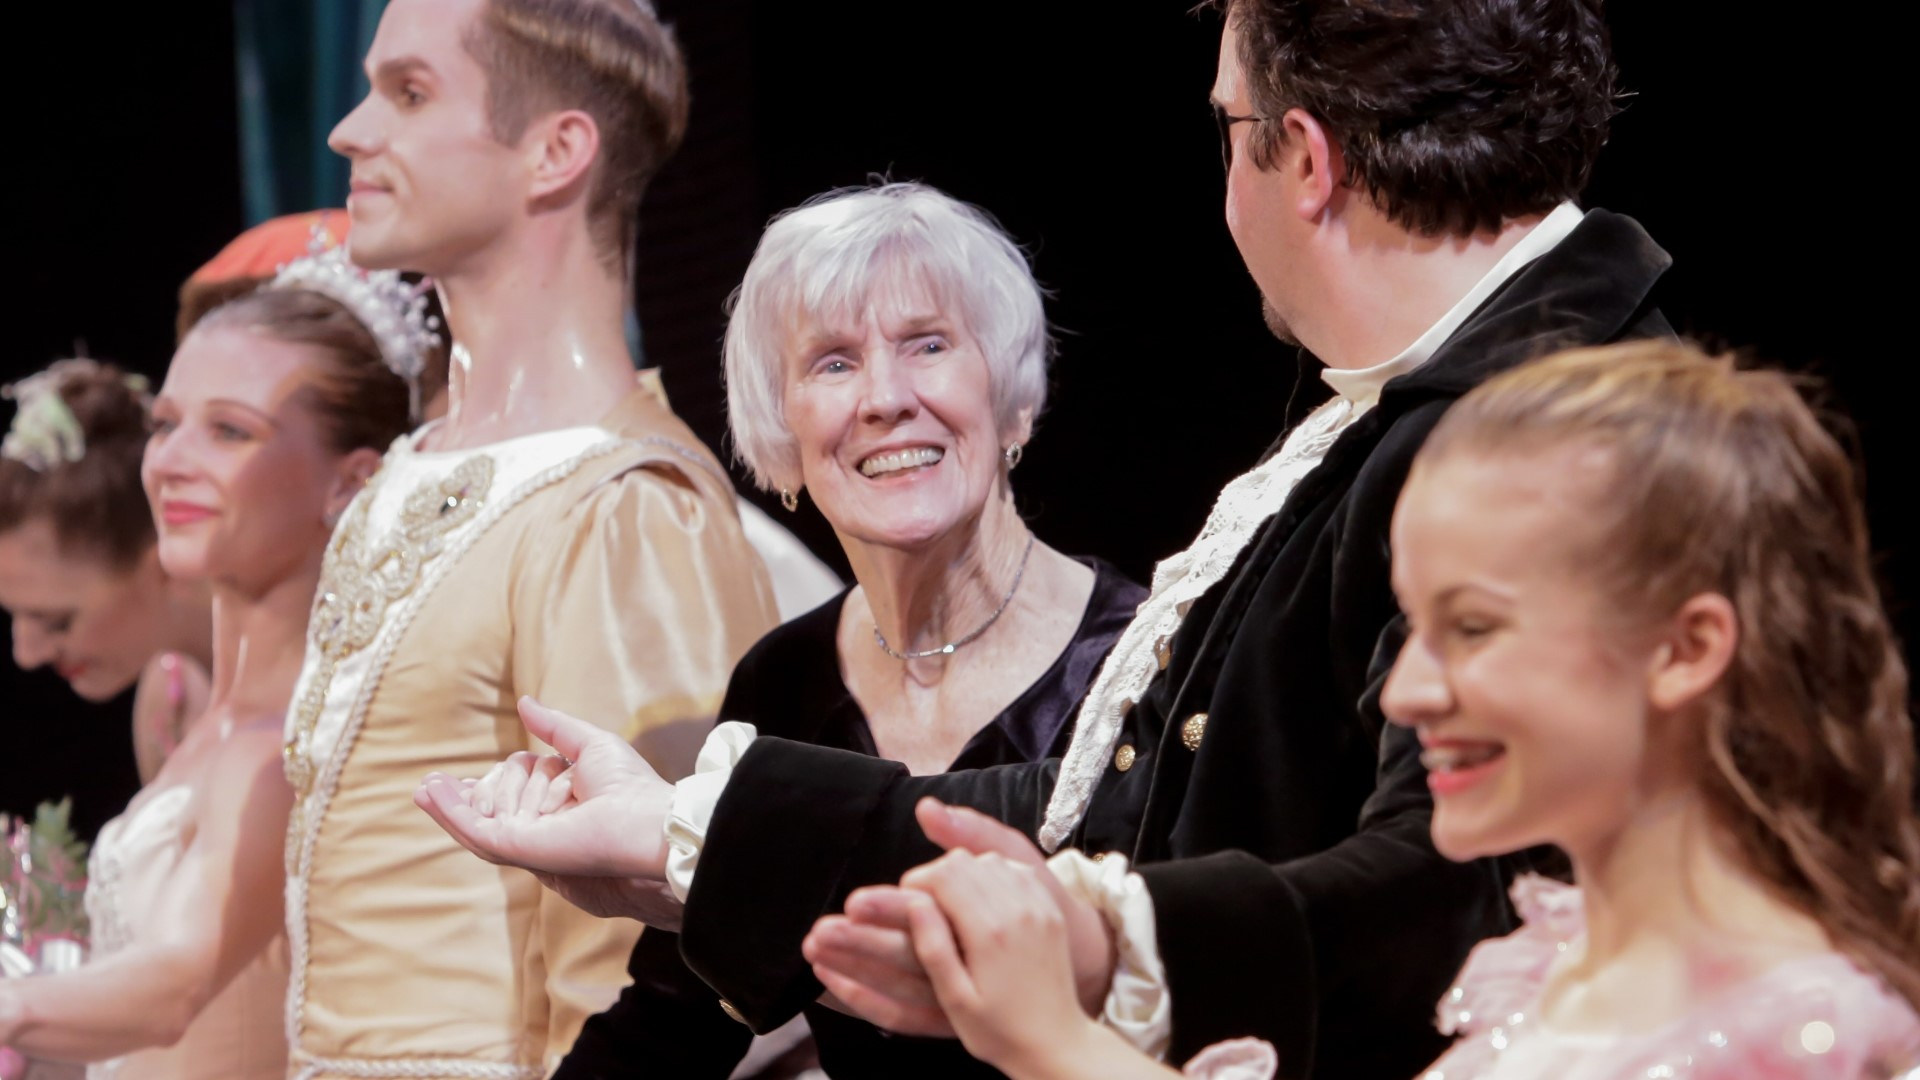 Jean Weaver, passed away earlier this month at age 95 on World Ballet Day.